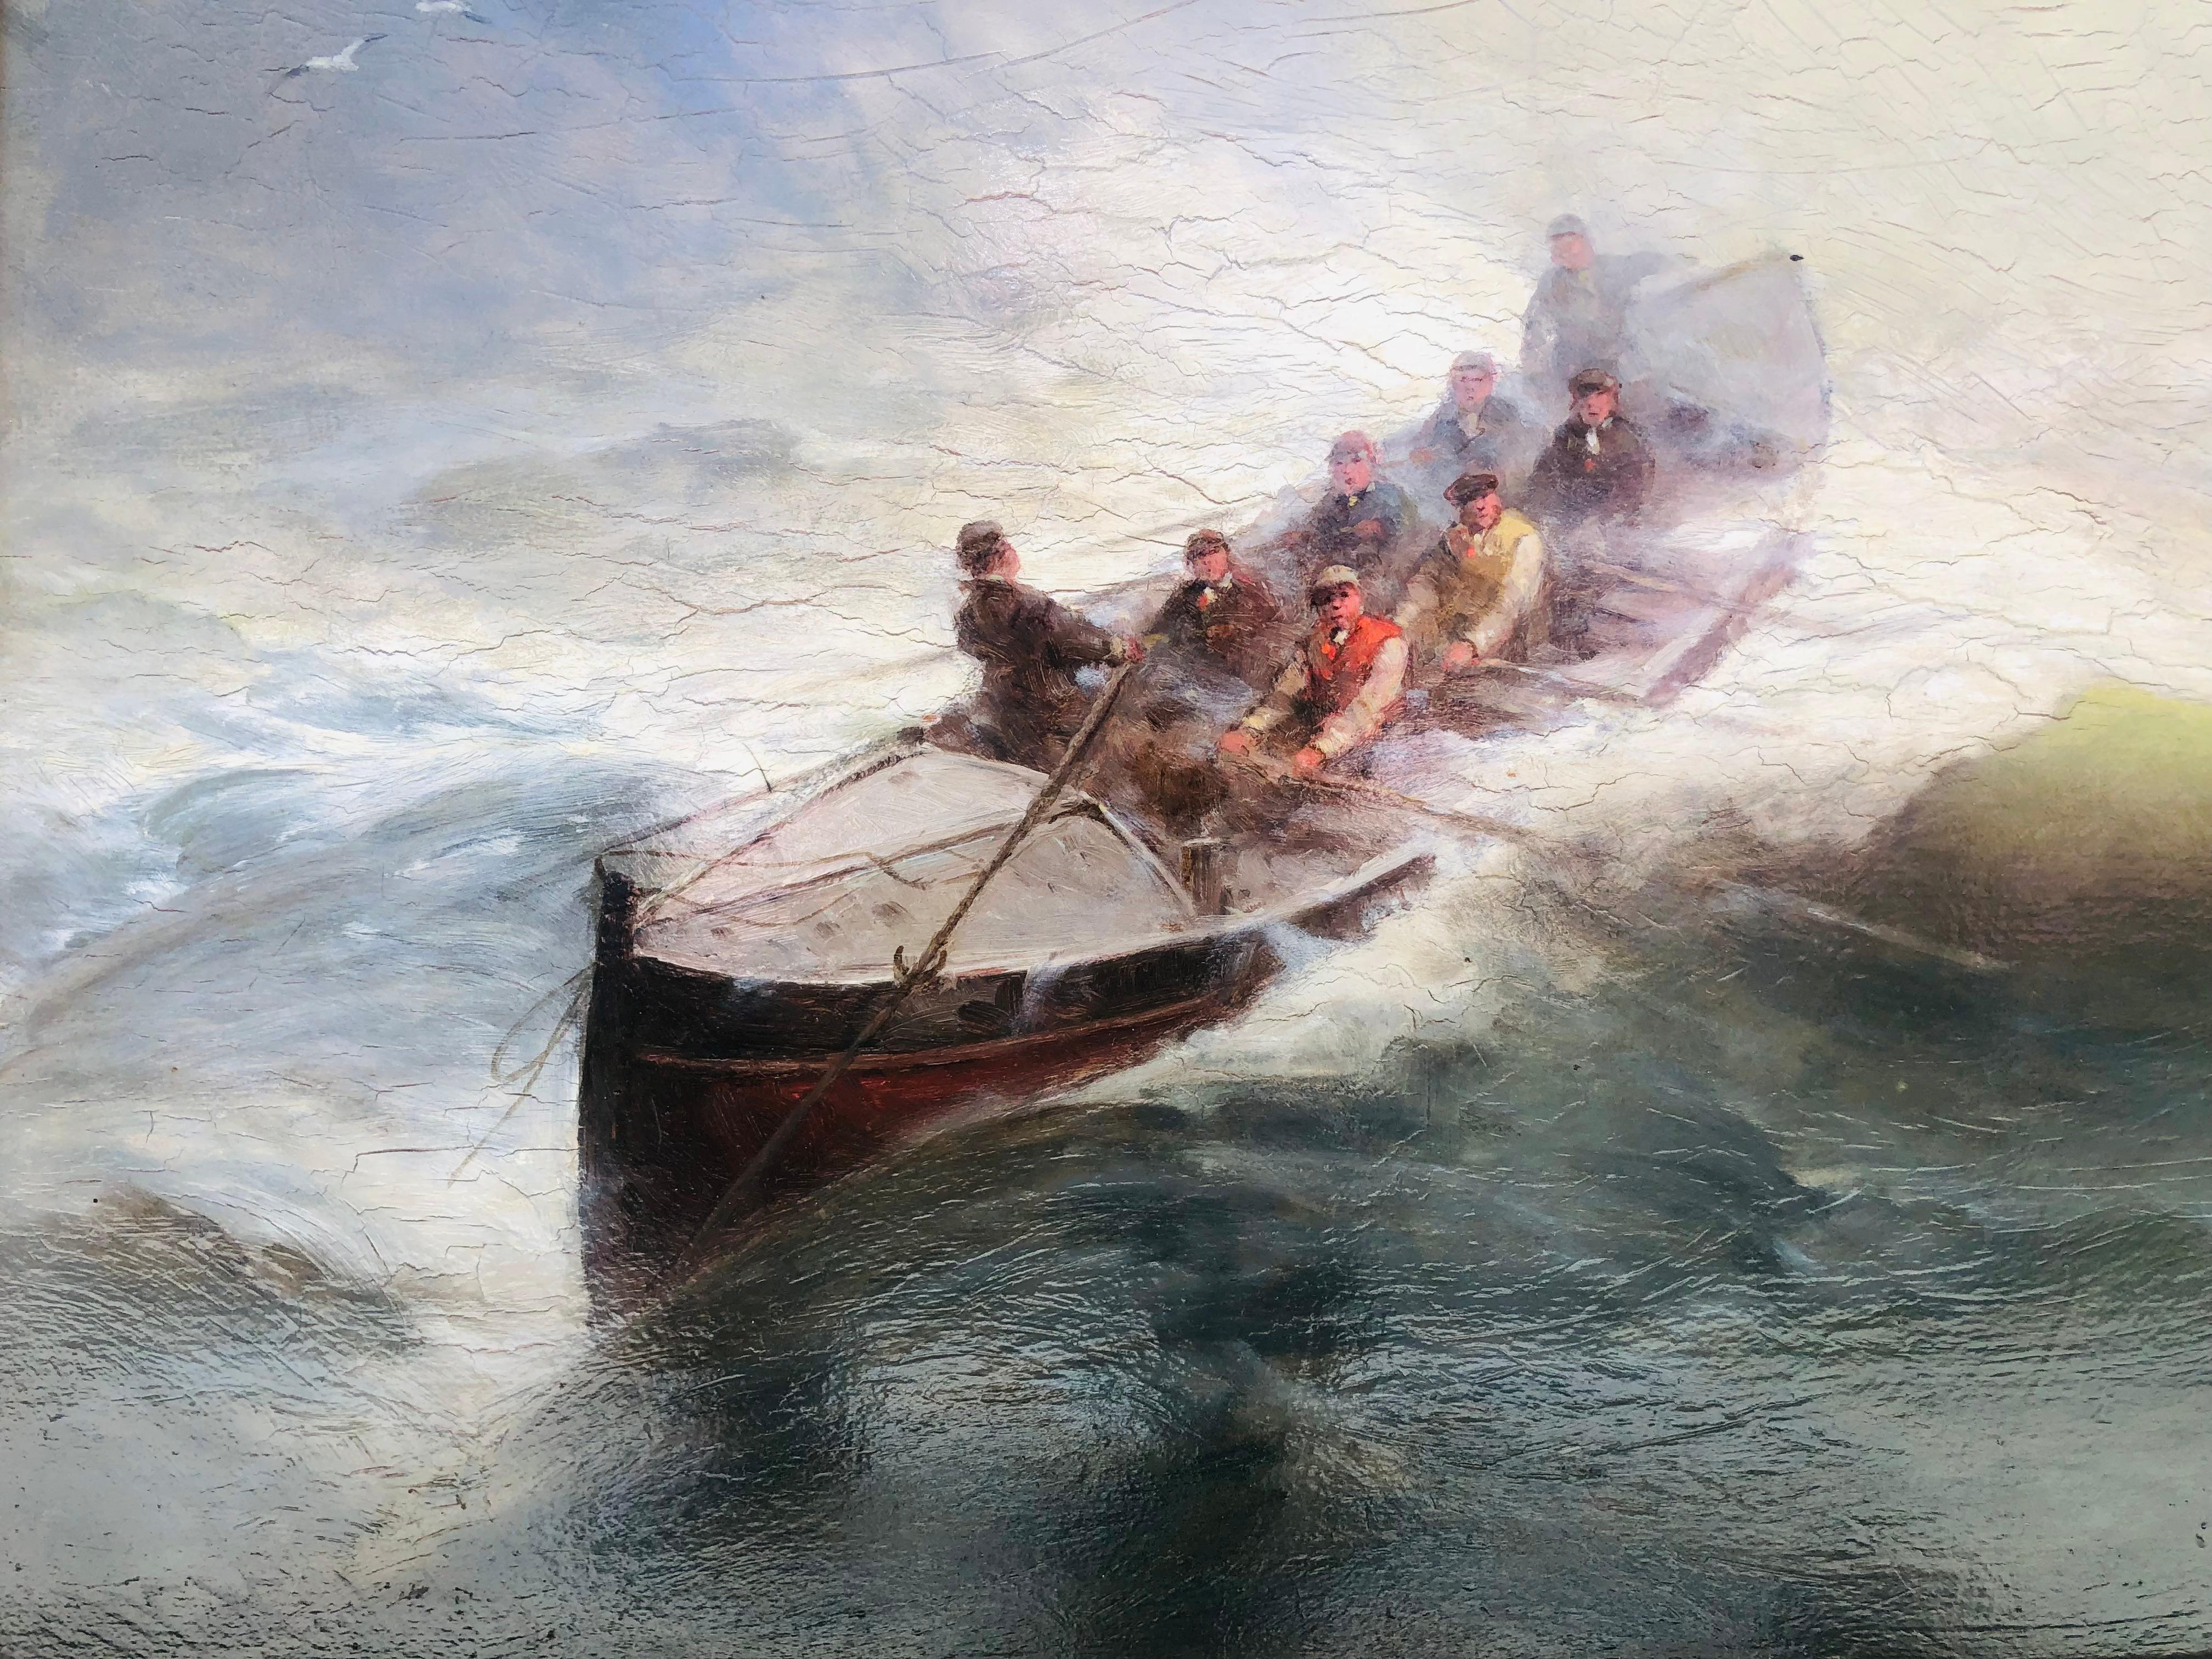 Fine late 19th C oil painting on cradled wood panel by George Washington Nicholson. The painting is in very good cleaned condition and shows Surfmen rescuing a ship in distress. This genre of painting was popular during the second half of the 19th